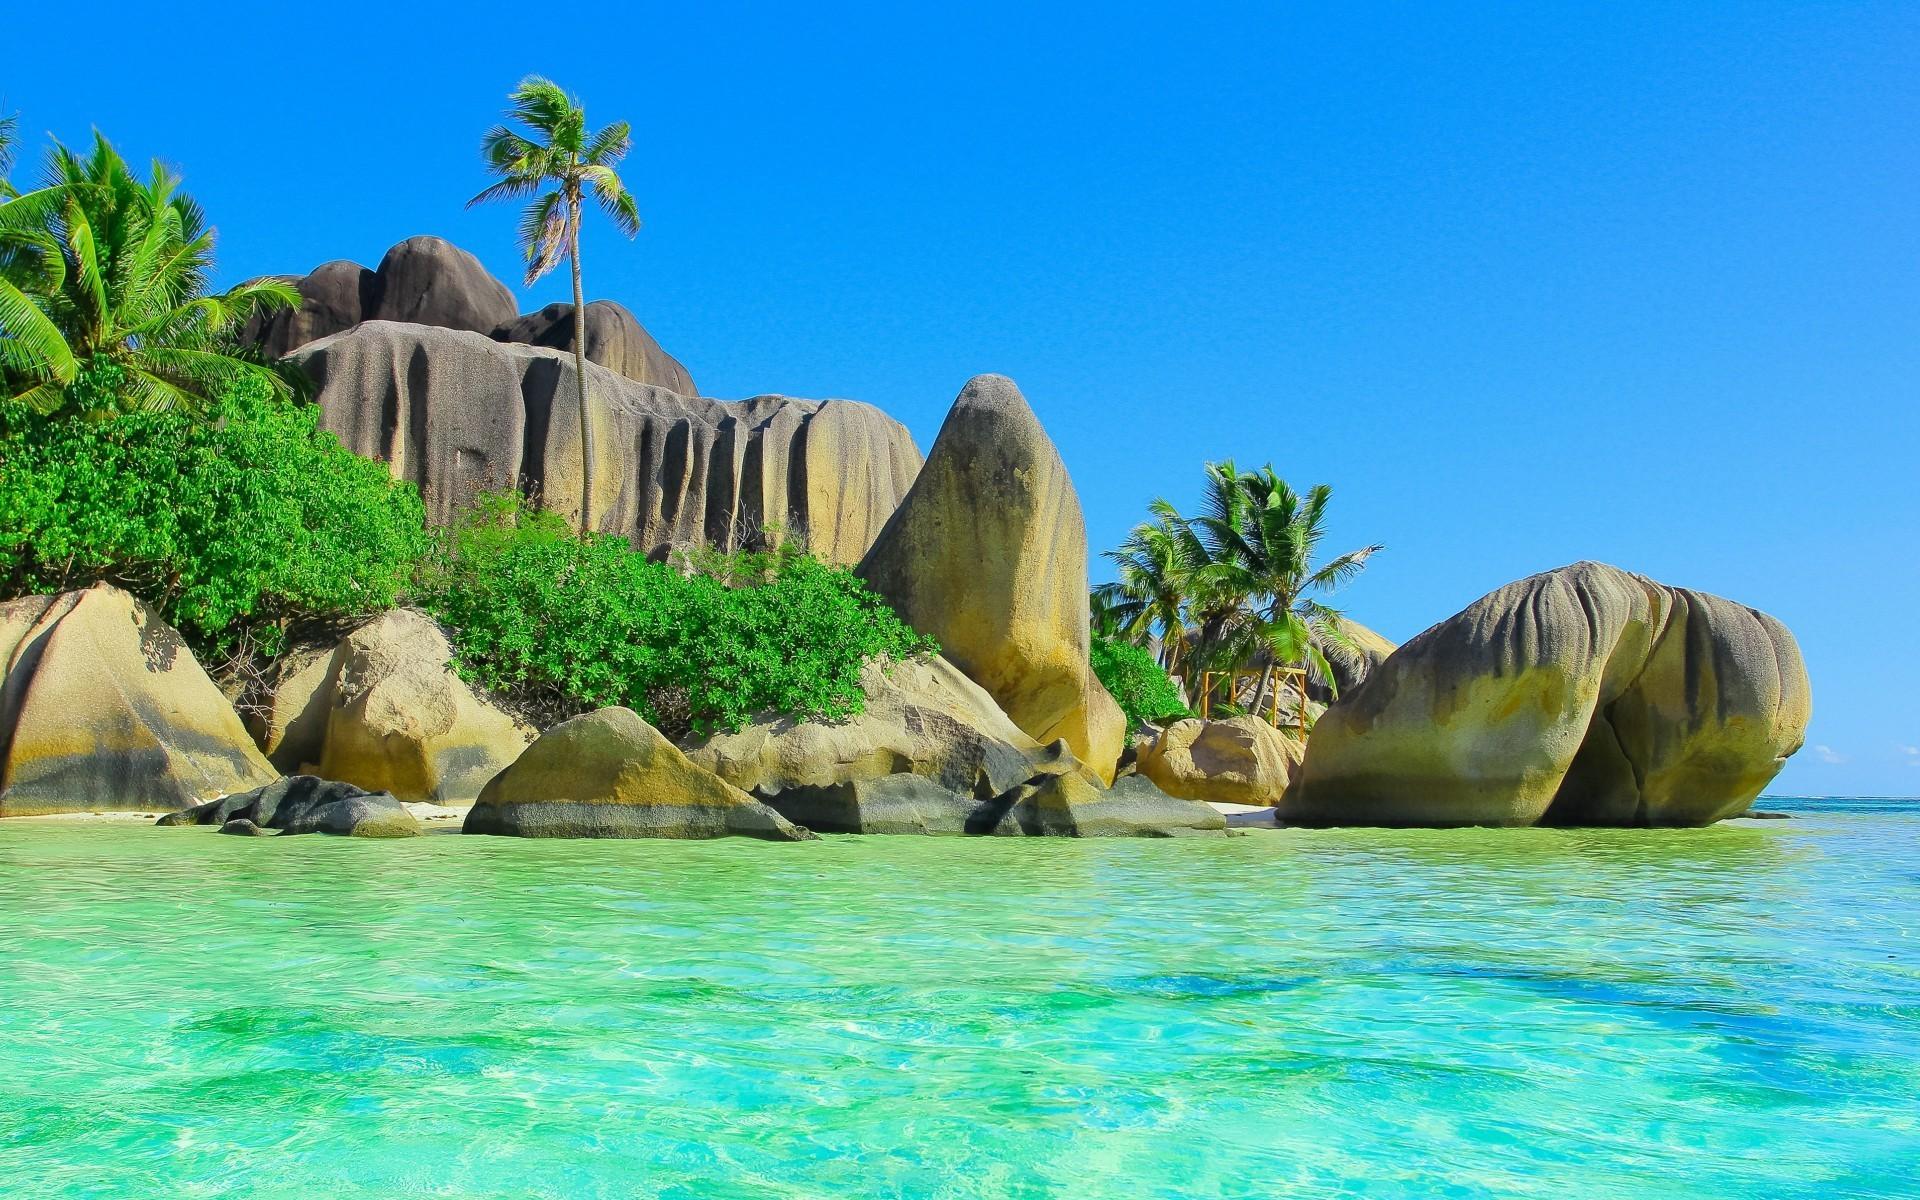 Huge smooth stones on a tropical island wallpaper and image